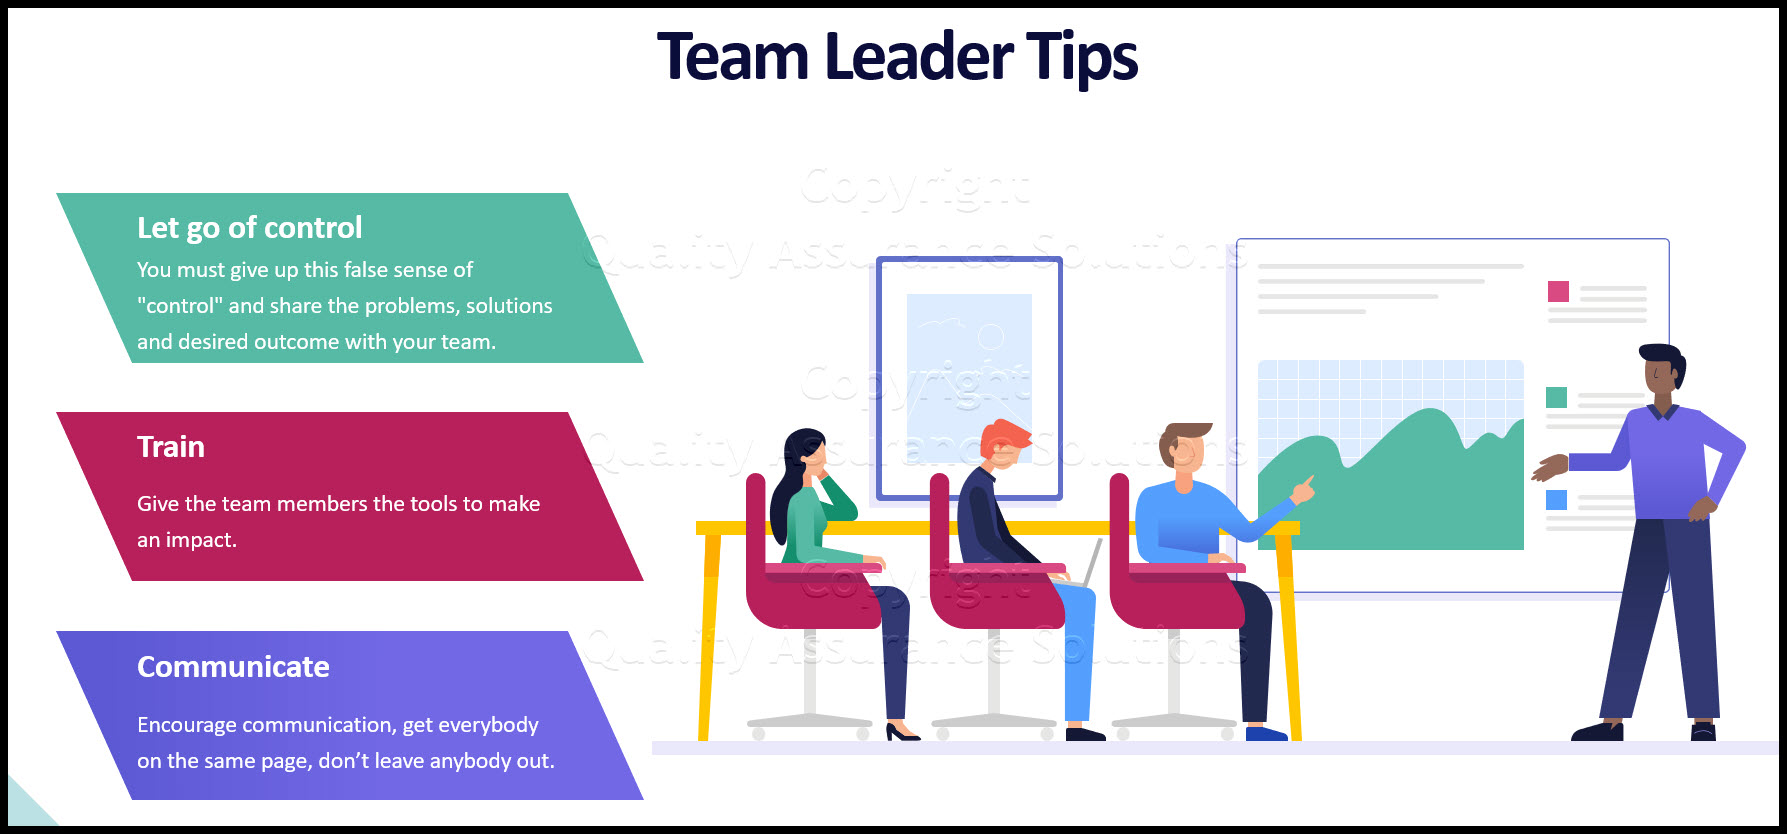 Building a team while staying balanced is an essential skill to learn to maximize the effectiveness of your business and avoid burnout.